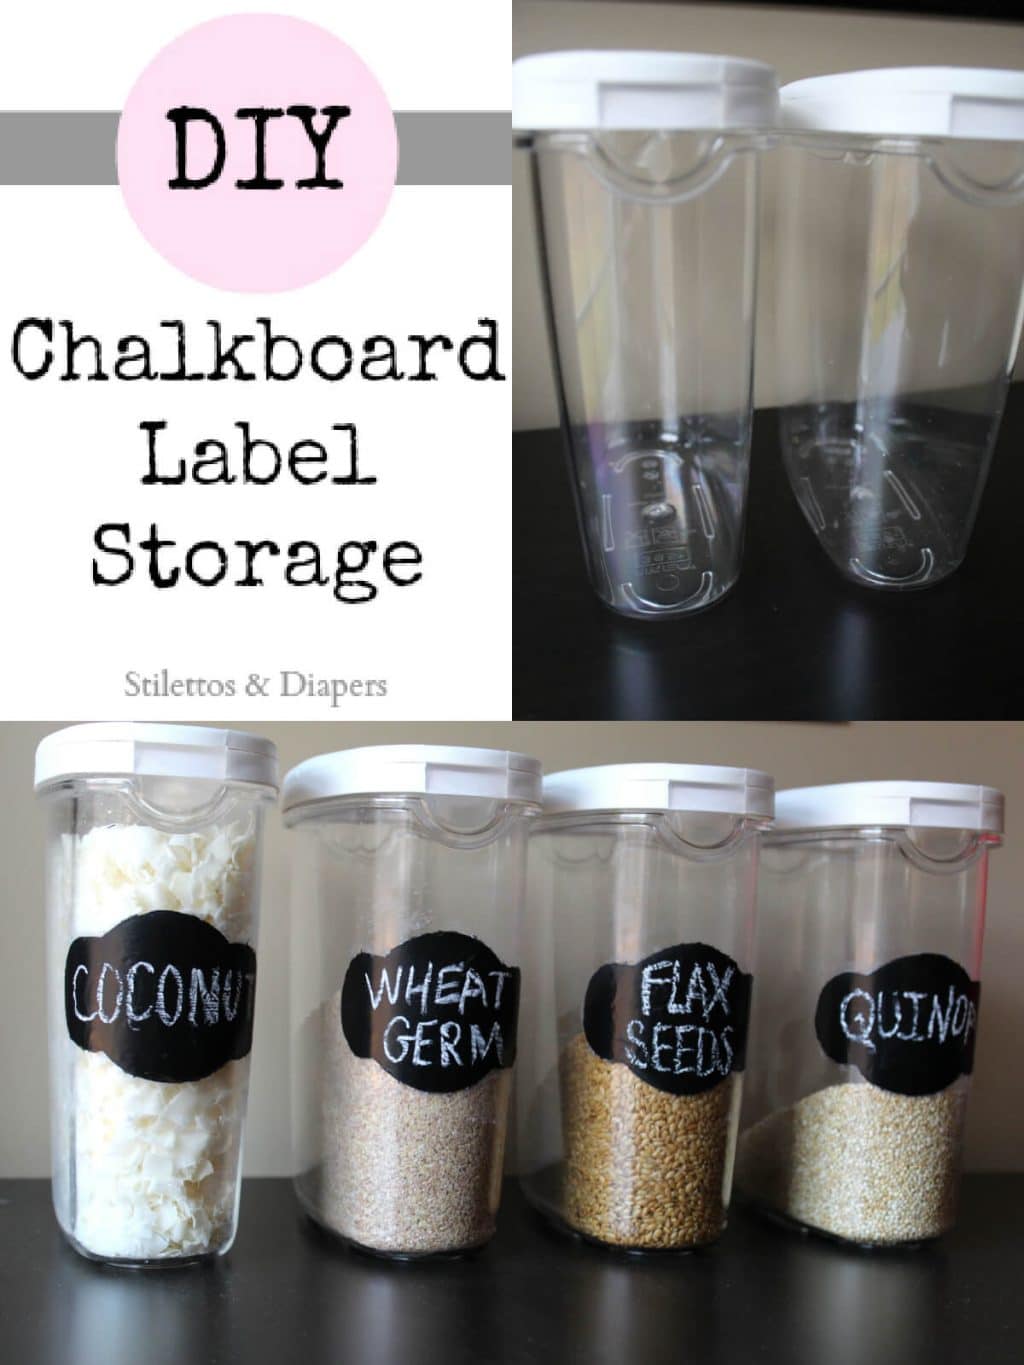 DIY: Chalkboard Label Storage Containers - Stilettos & Diapers